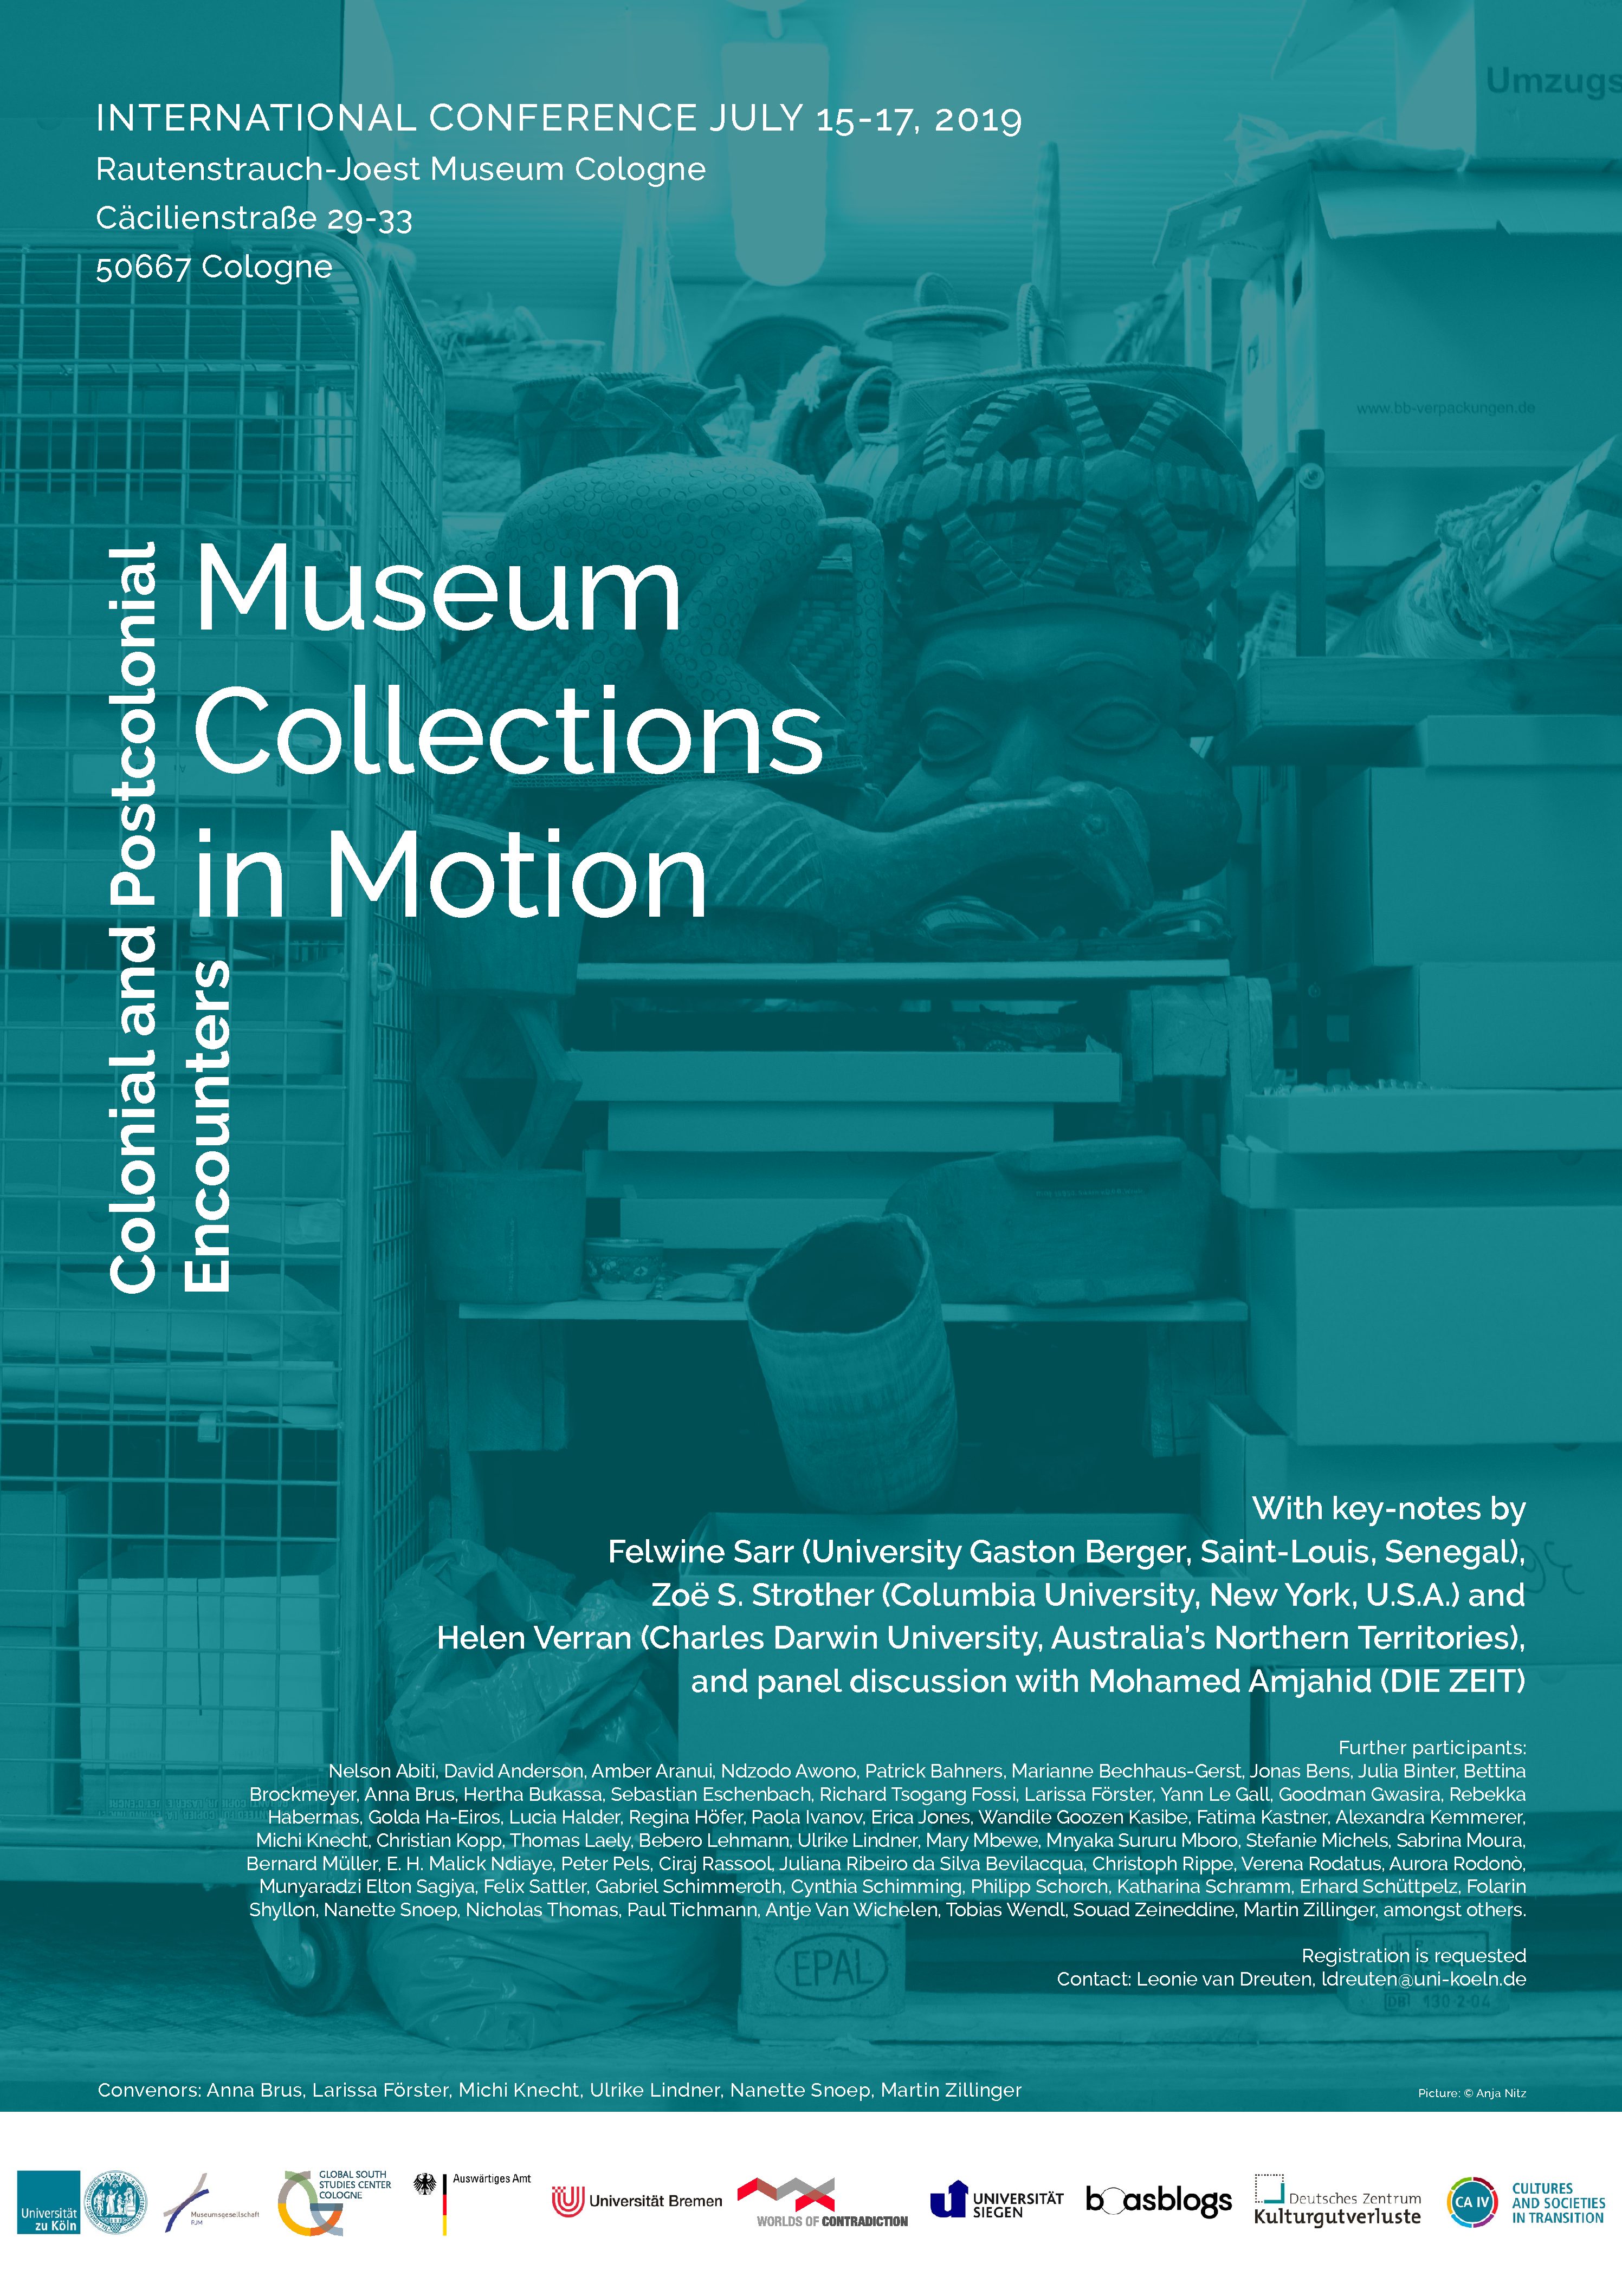 Museum Collections in Motion